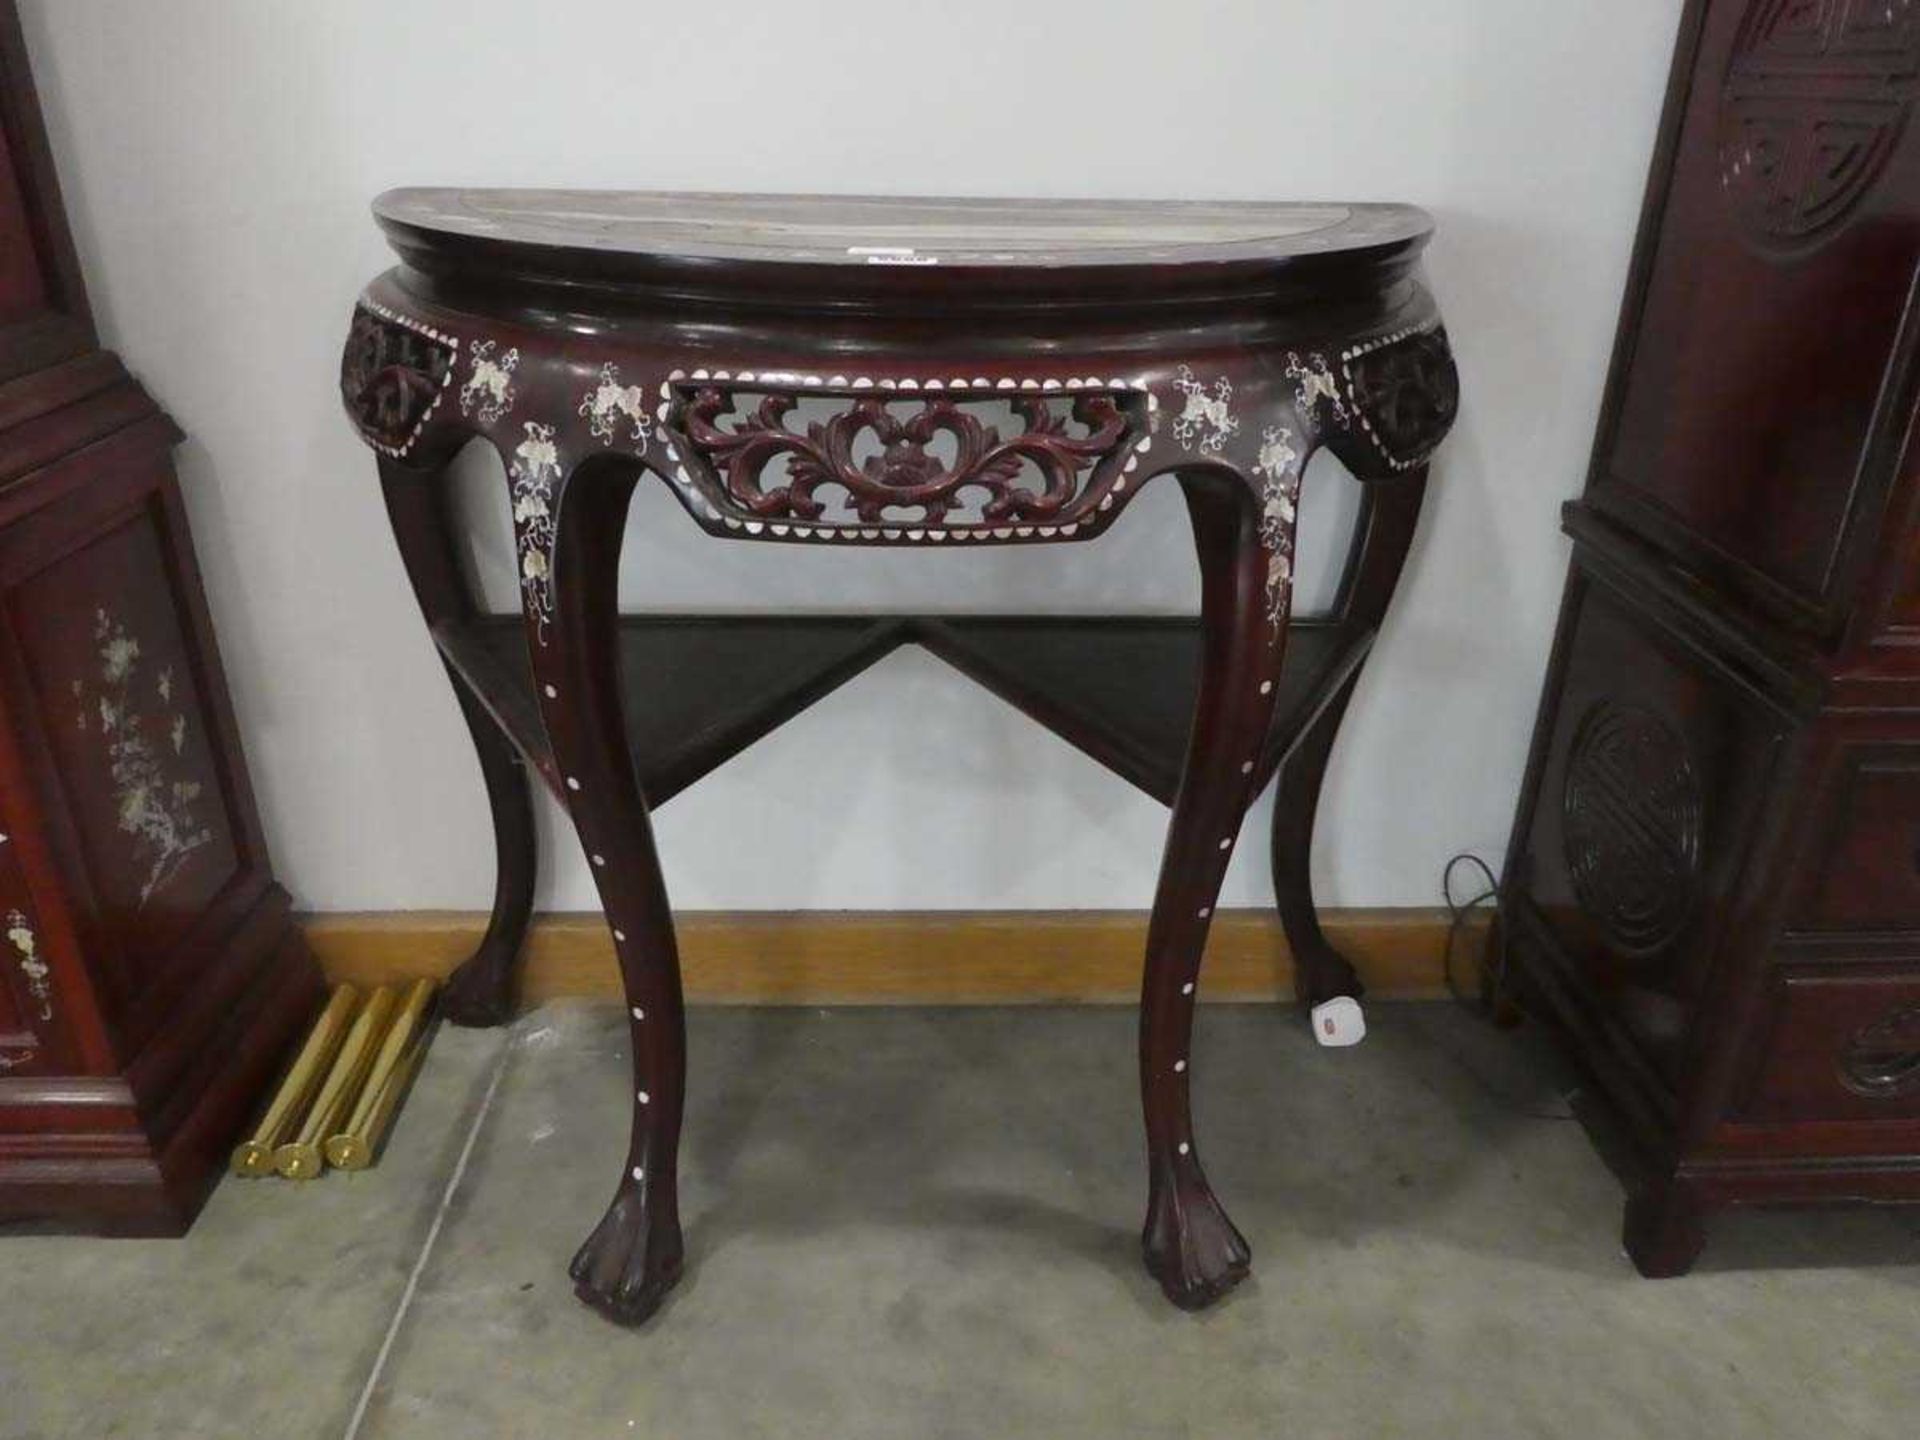 Oriental export marble topped mother of pearl inlaid redwood console table